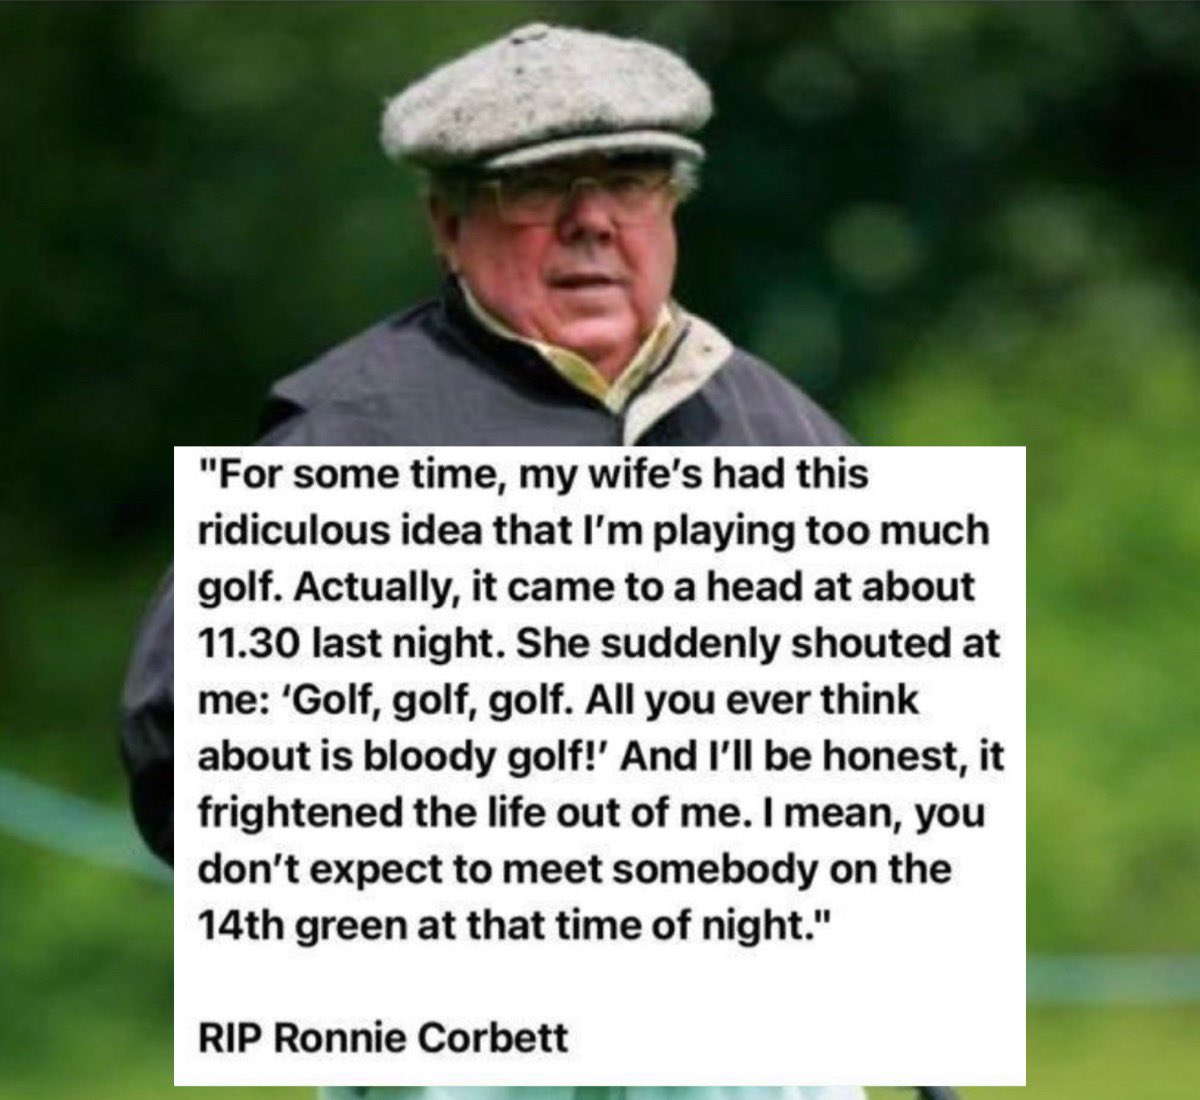 This is a classic from Ronnie. Every golfer can relate with this obsession for the game! 🤣